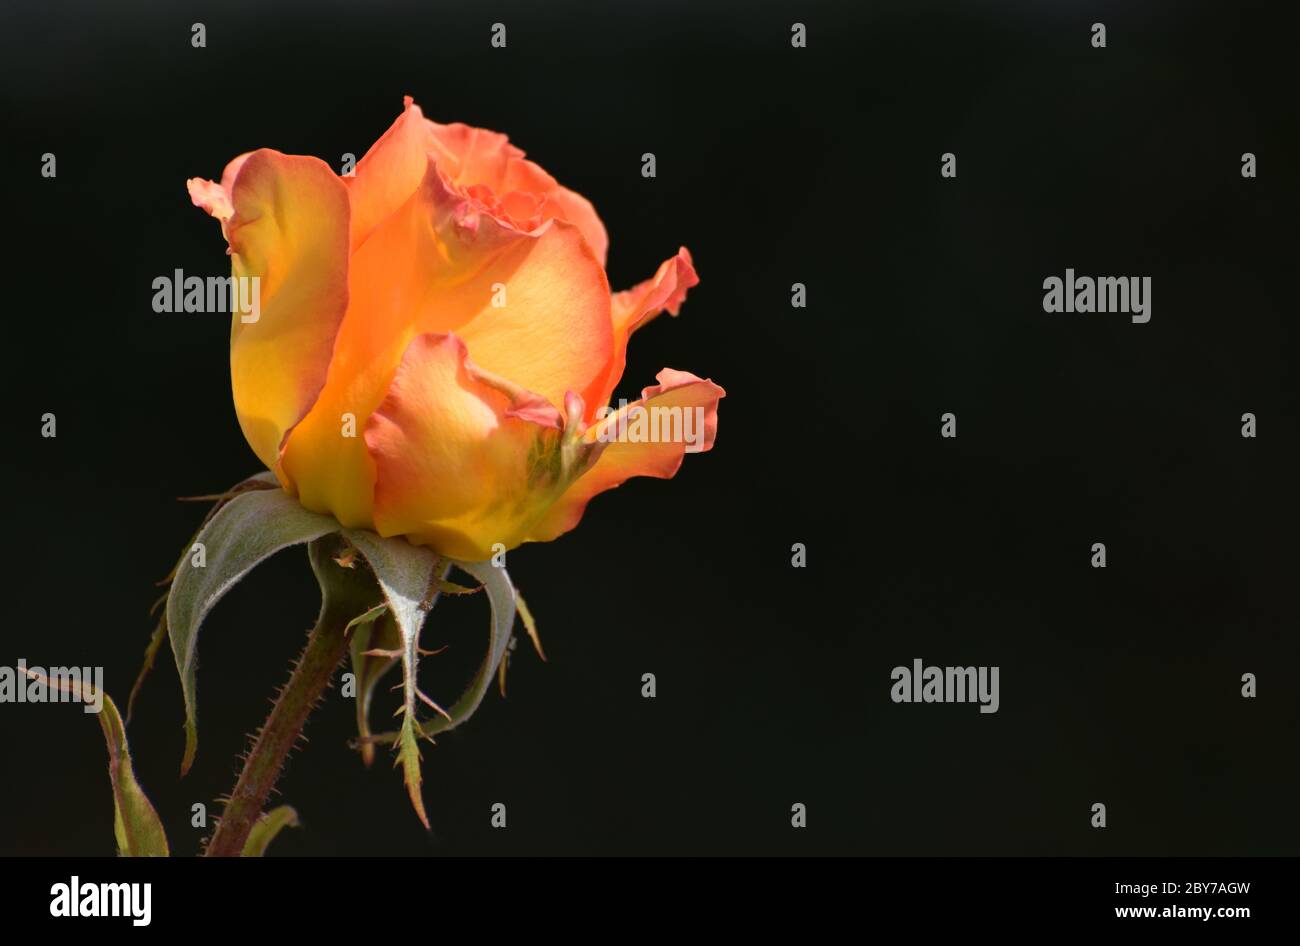 Orange and yellow rose flower against a black background with copy space Stock Photo